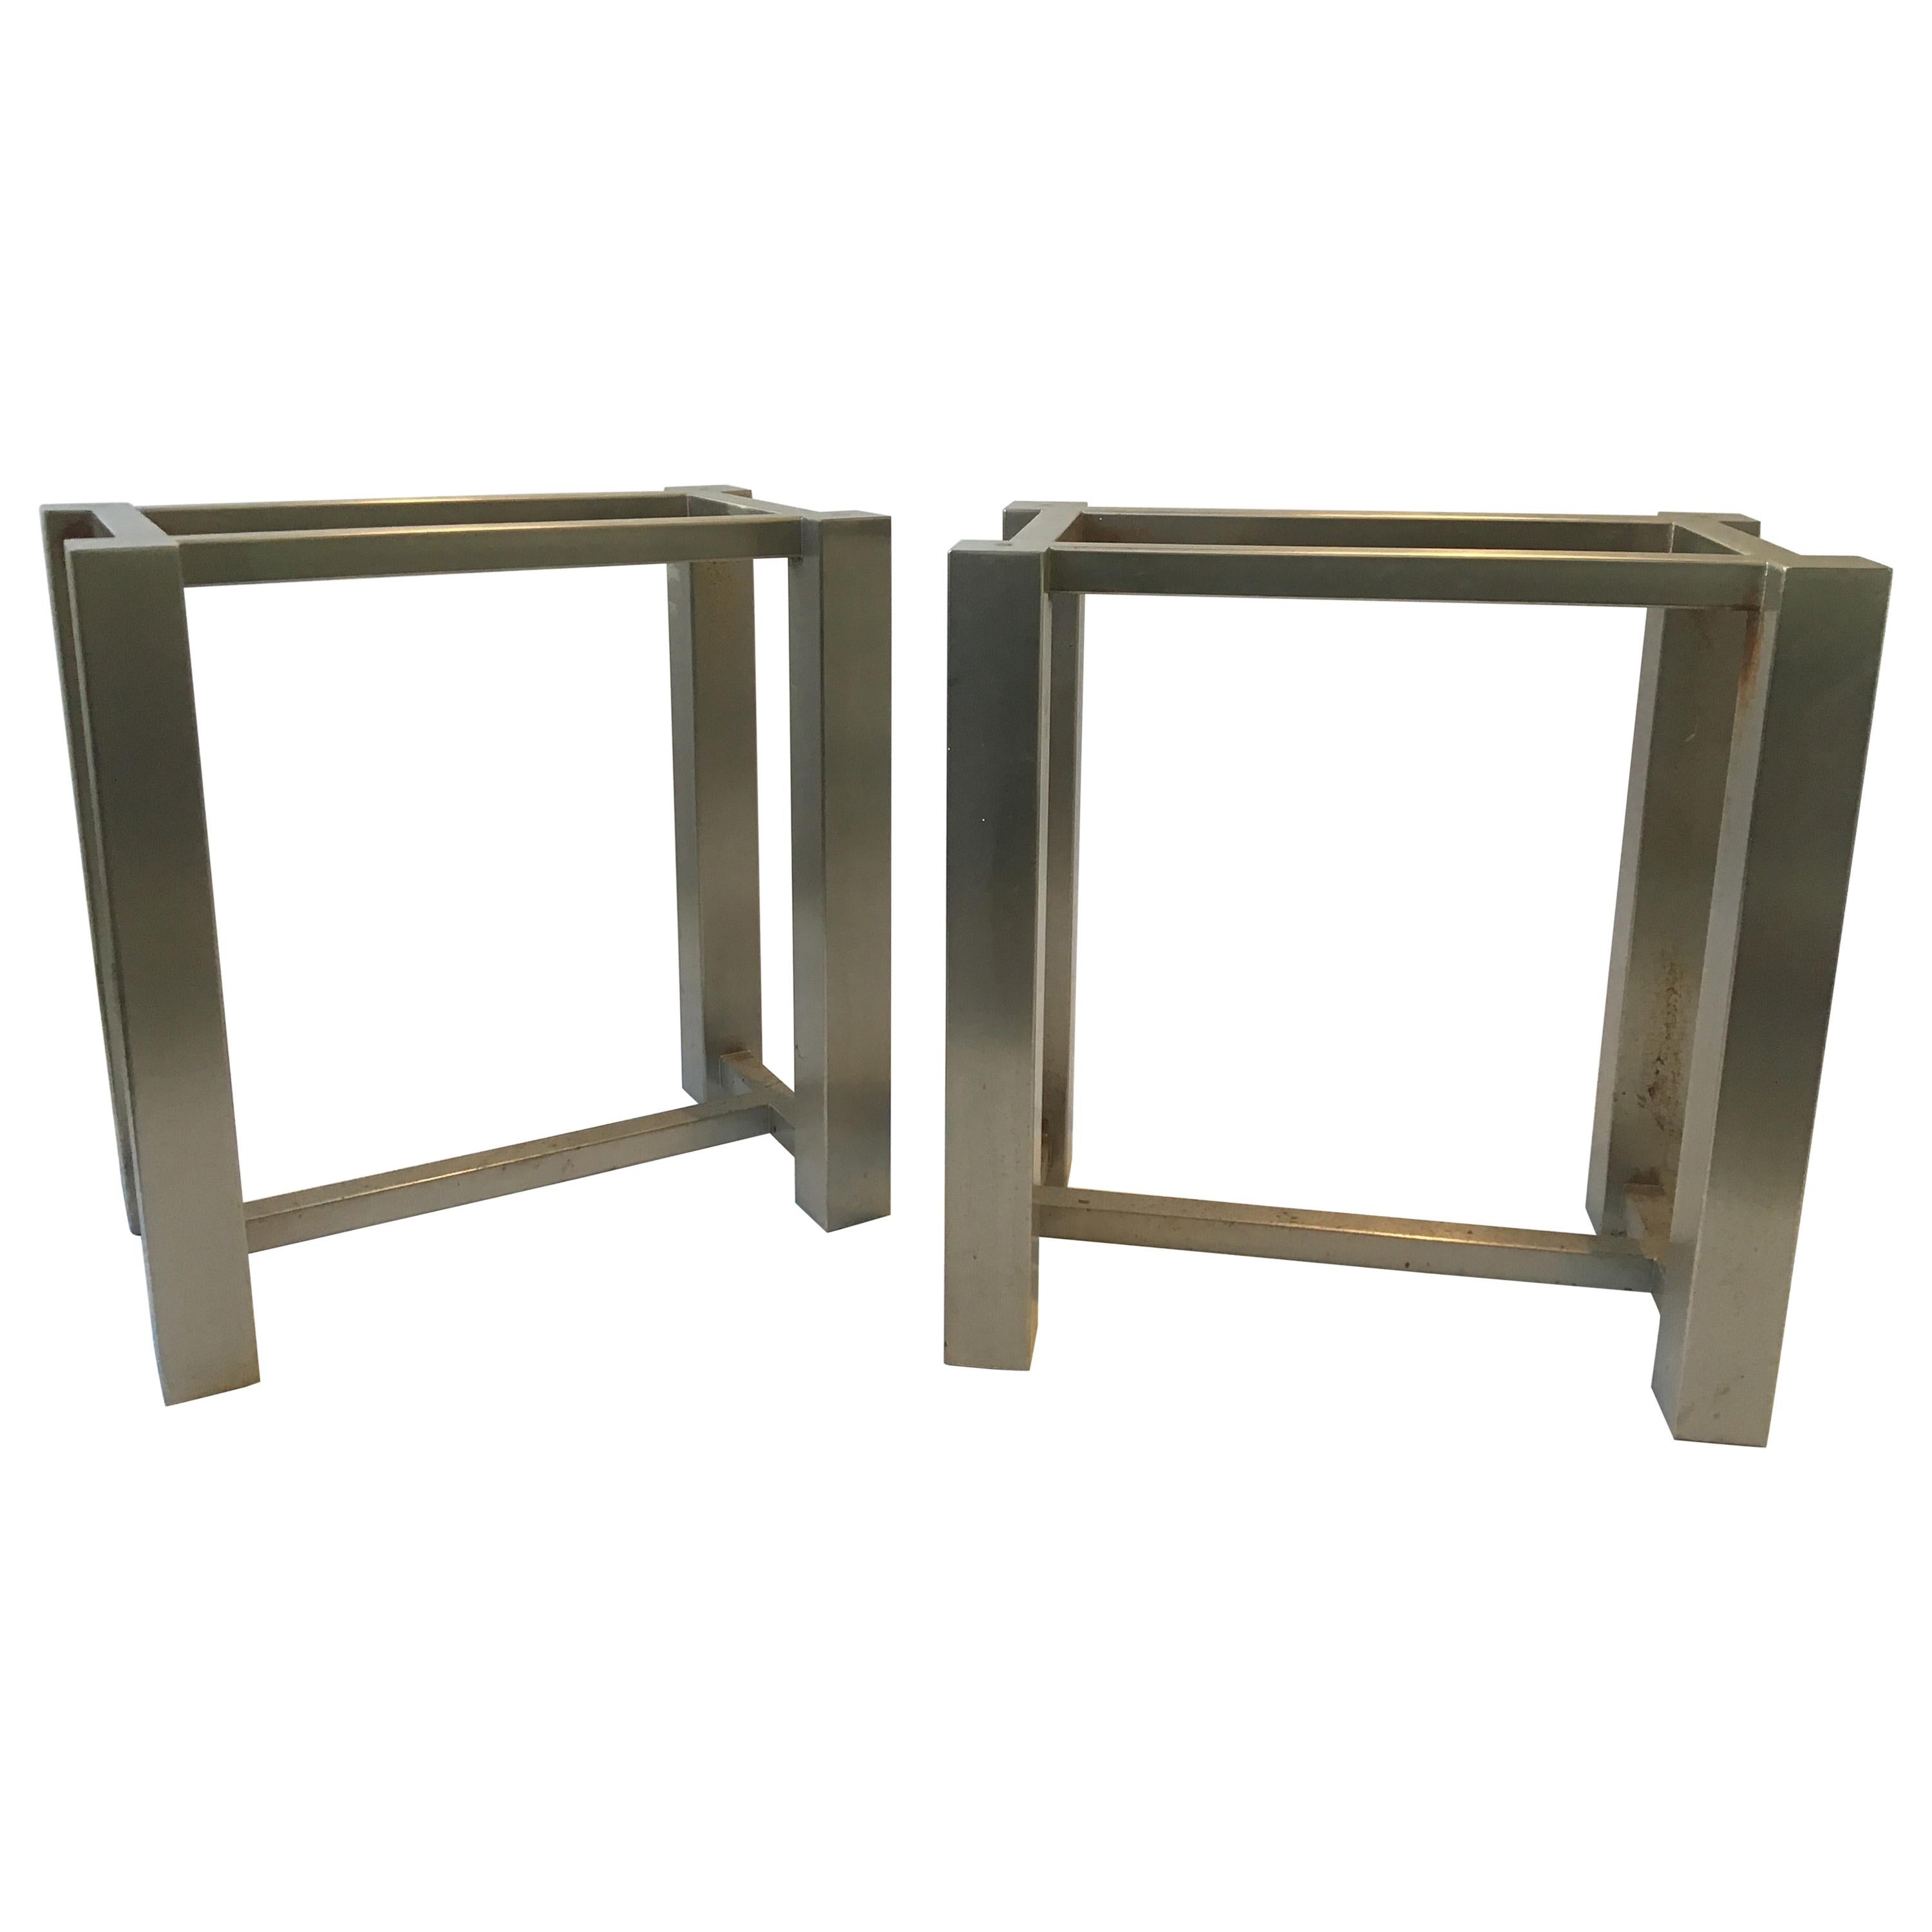 Pair of Steel Table Bases